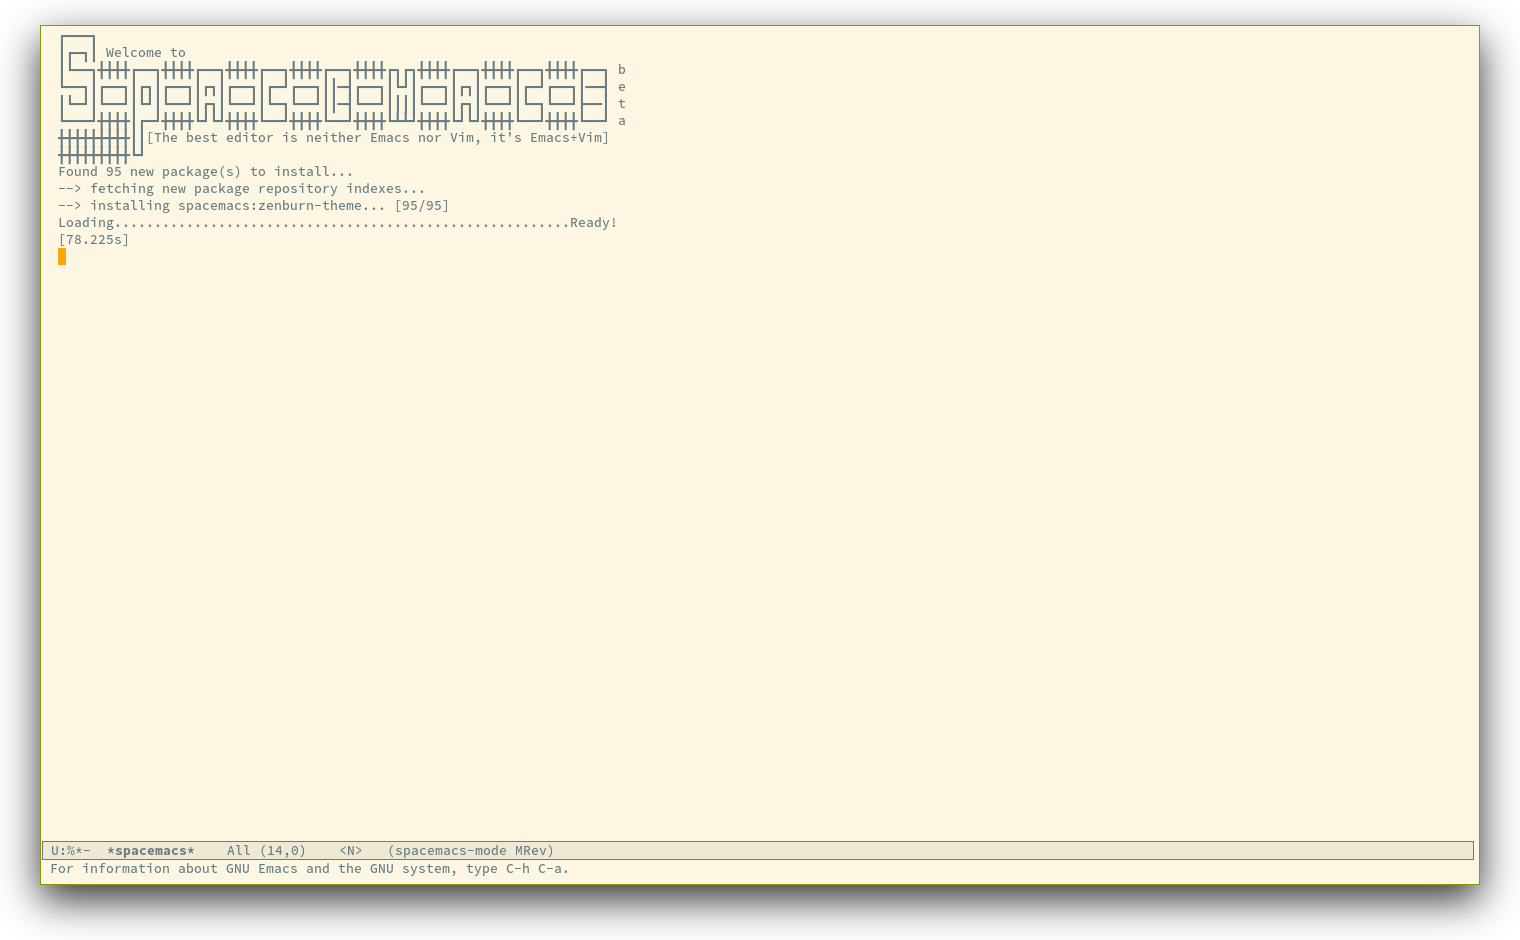 /TakeV/spacemacs/media/commit/bc197a288cd5ca7736bee0bcb753ea2413c1fc11/doc/img/spacemacs-startup.png